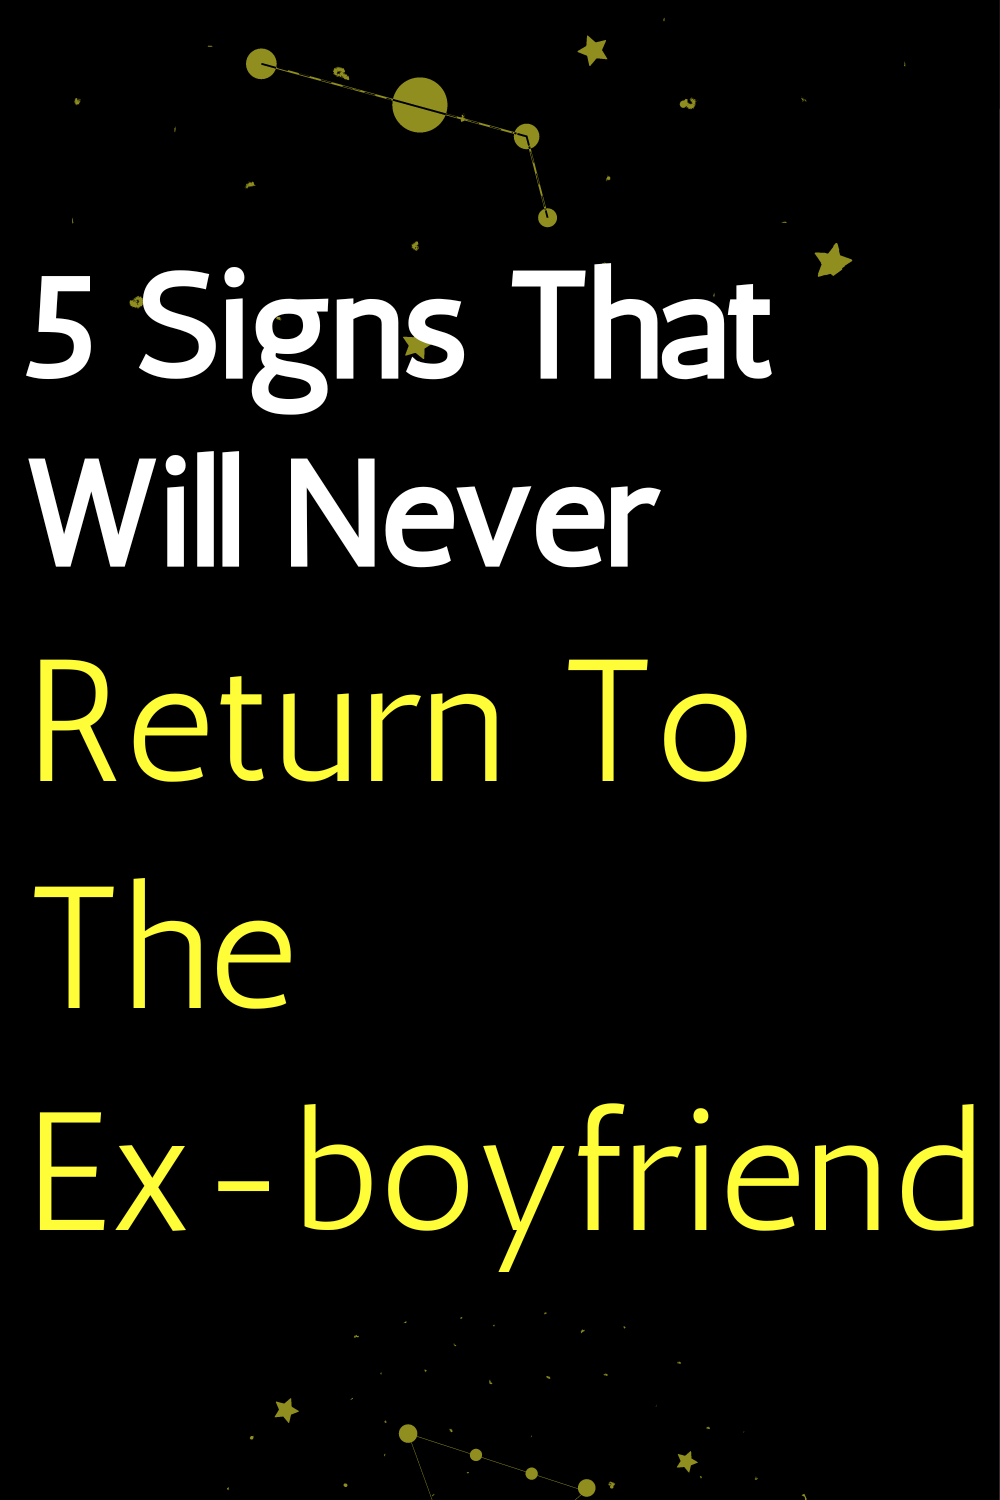 5 Signs That Will Never Return To The Ex-boyfriend